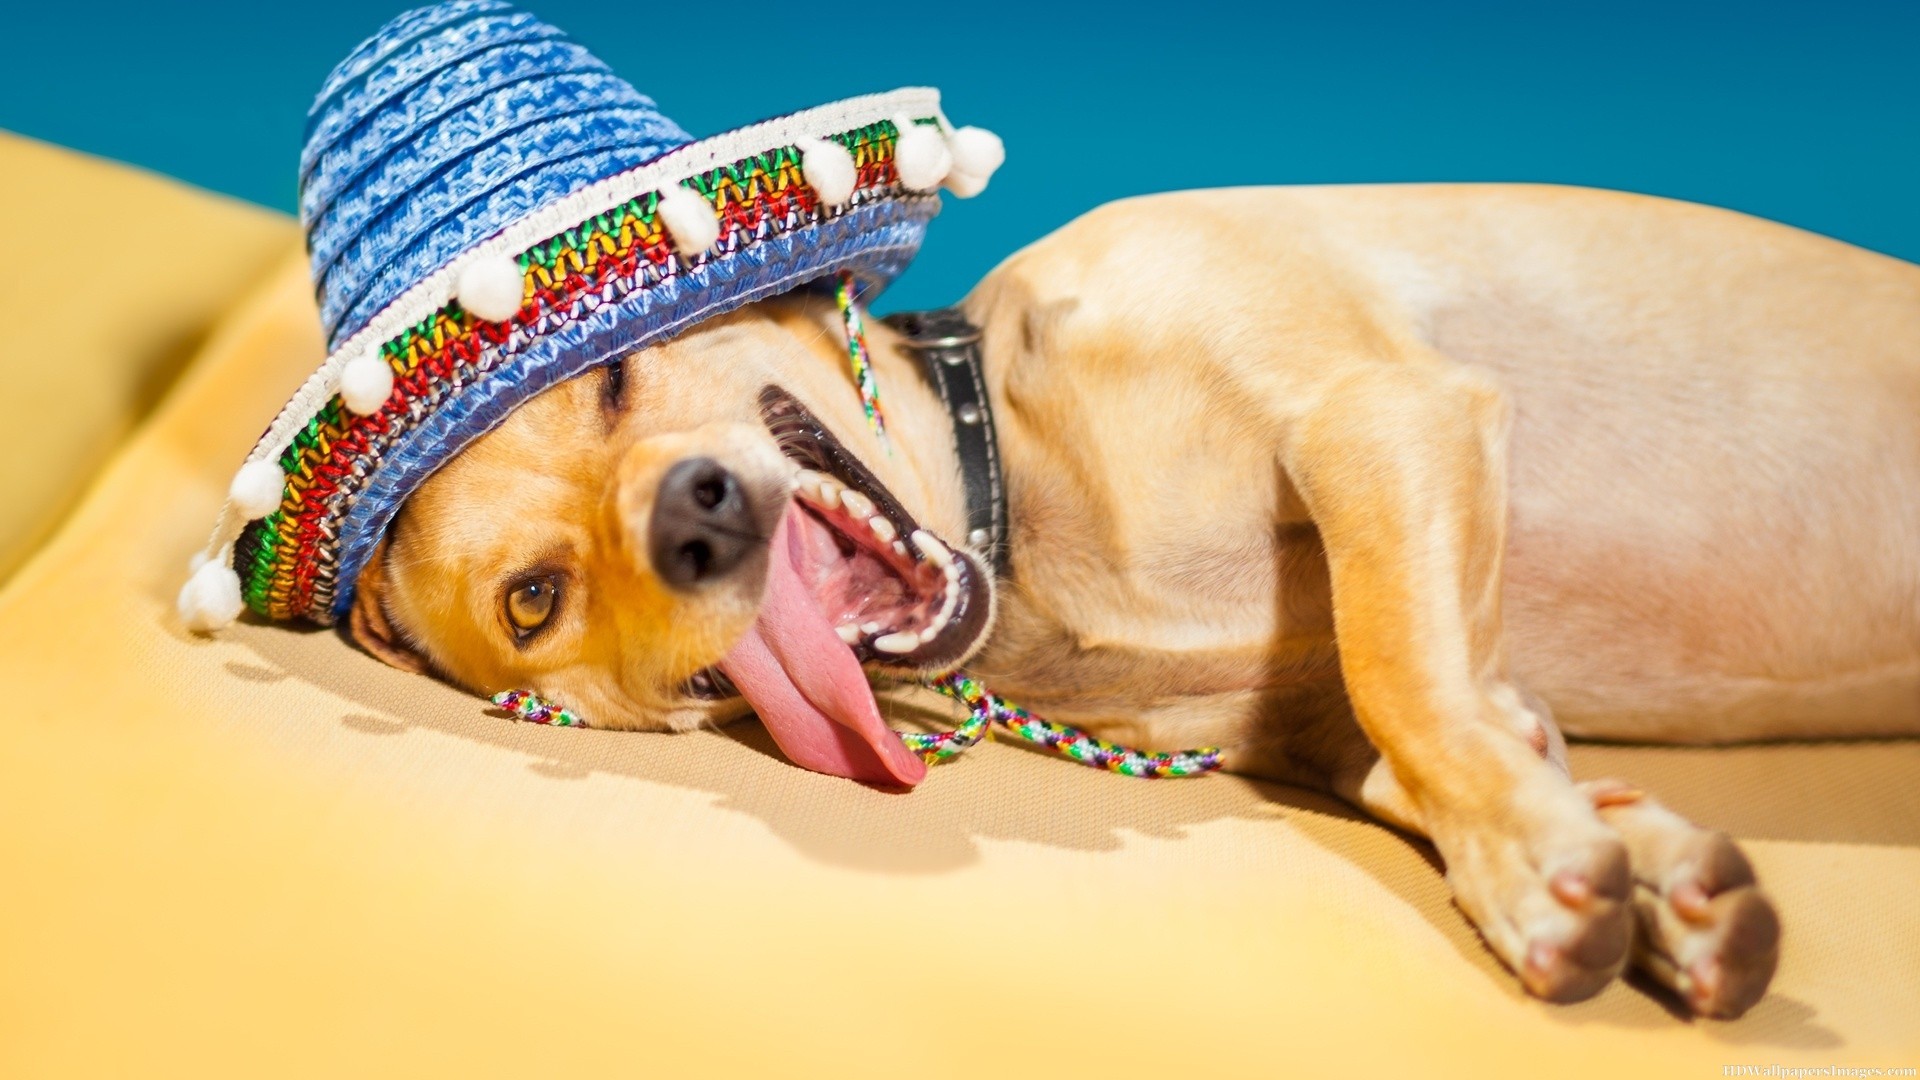 funny-dog-wearing-summer-hat-images-hd-wallpapers-wallpaper-cute-summer-dog-wallpapers-direct-hd-download-for-iphone-ipad-borders-free-naruto-mobile-3d